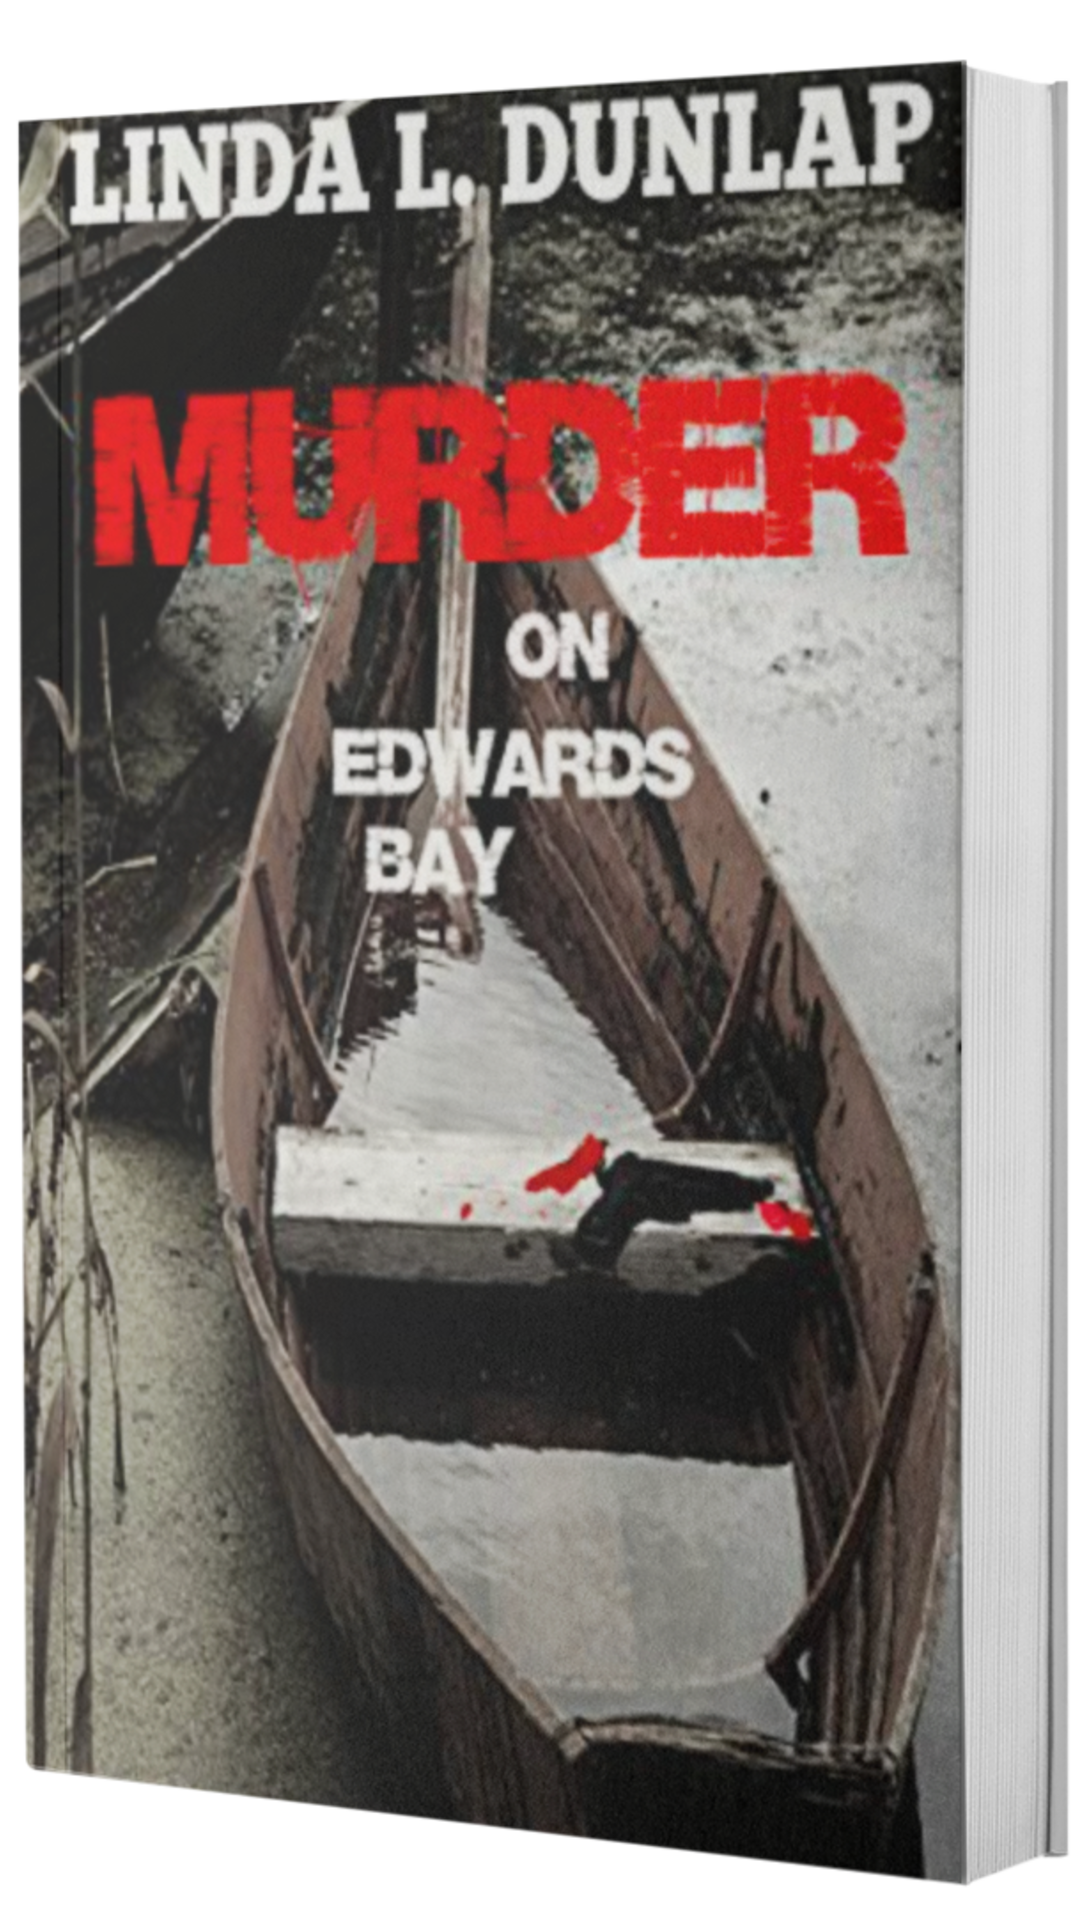 Link to purchase Murder on Edwards Bay on Amazon